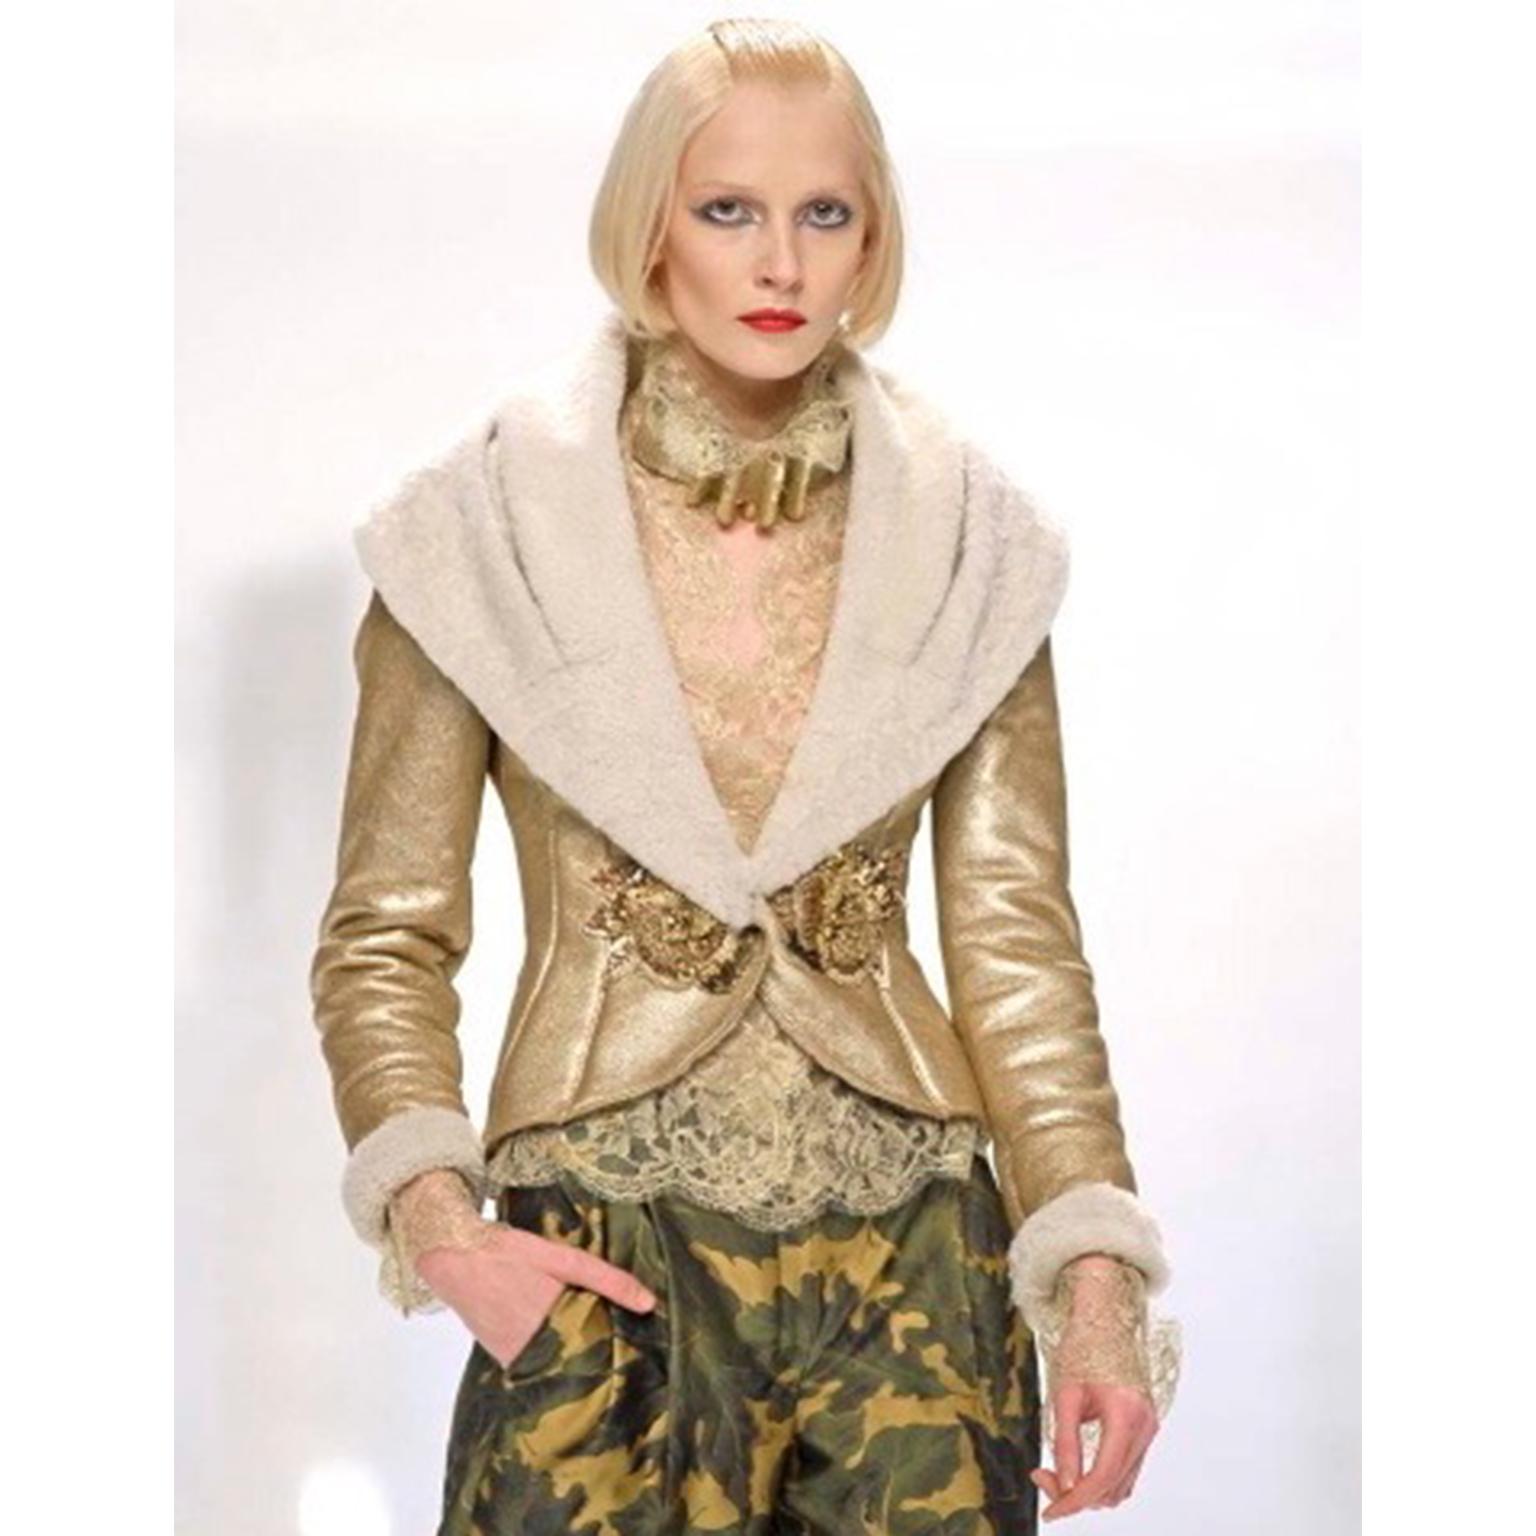 This is a stunning vintage Valentino gold fine lace evening blouse. This incredible top was designed by Valentino Garavani for his Fall Winter 2006 collection. 2006 was the last year that Garavani designed for his label.  The blouse buttons up the